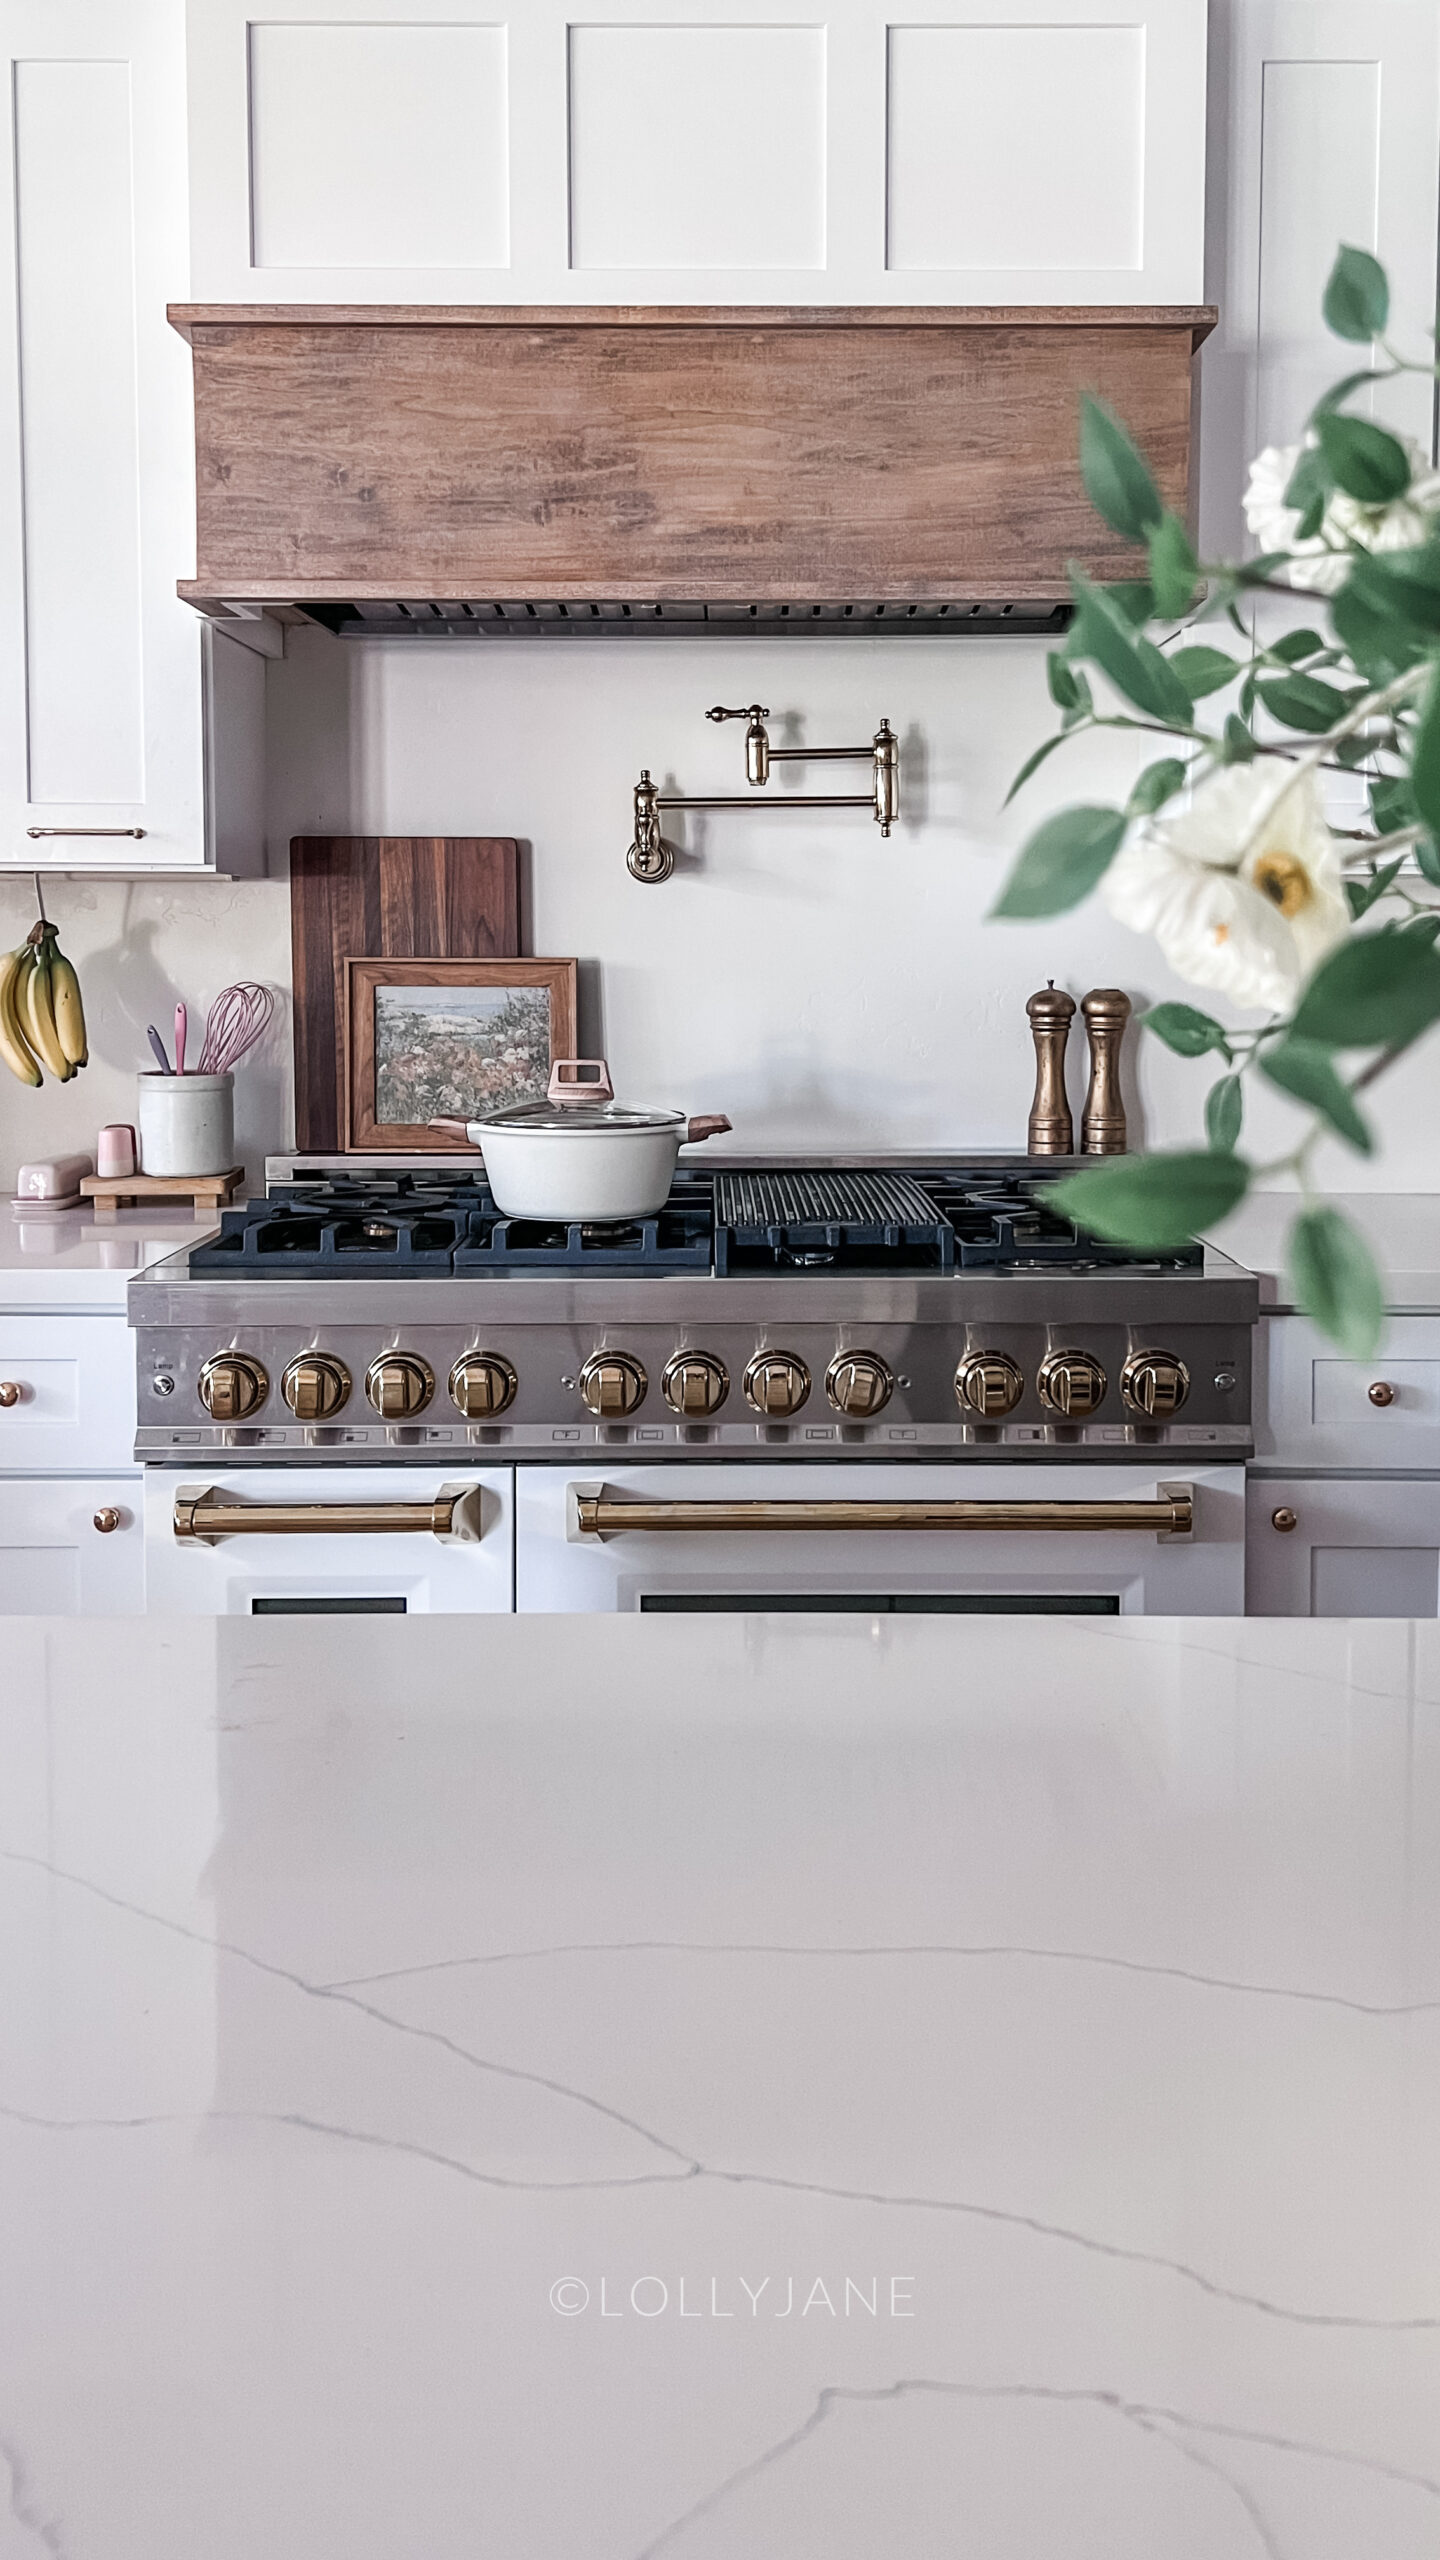 Top off your kitchen makeover with the best appliance package, featuring a high-performance range, smart oven and sleek refrigerator. Check out these must-have appliances to transform your daily kitchen experience.